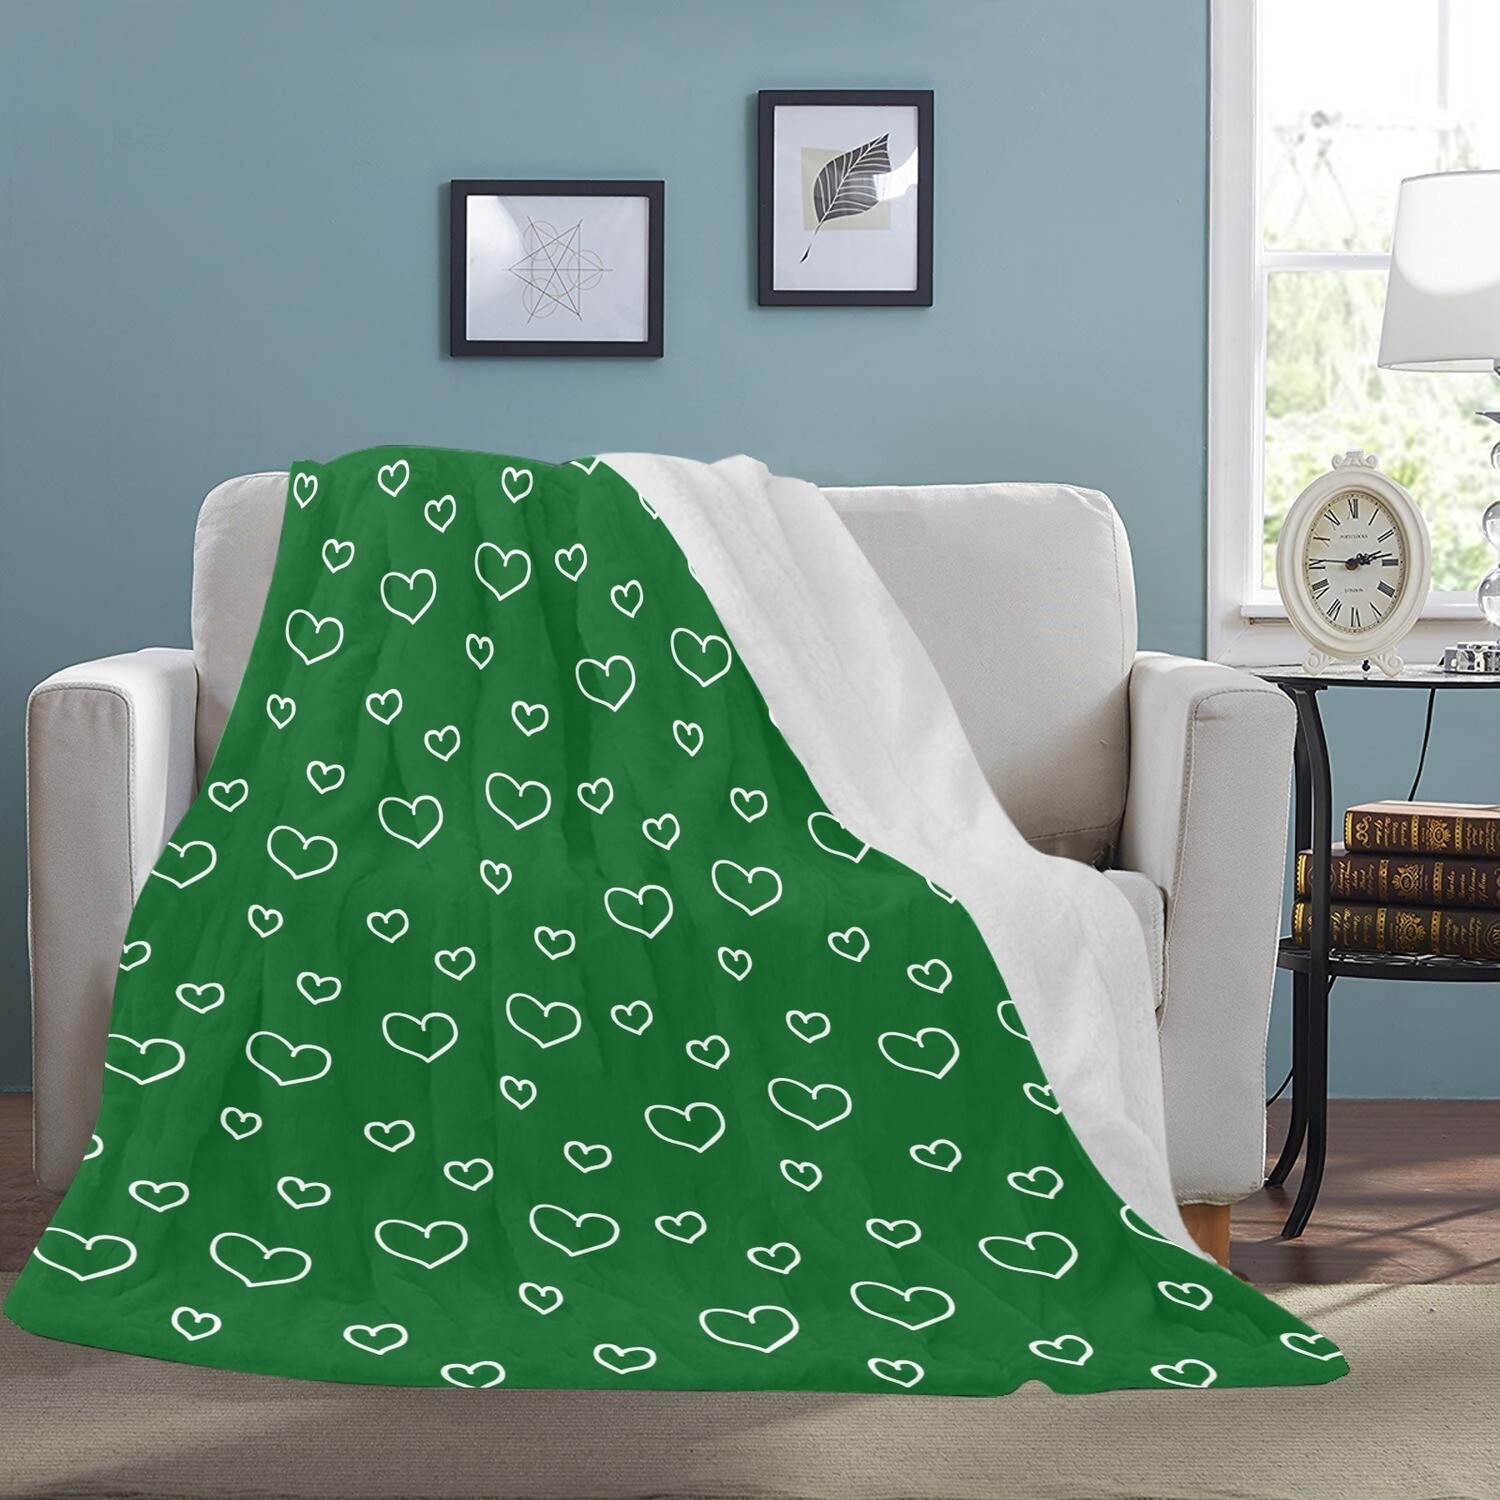 🤴🏽👸🏽💕Large Ultra-Soft Micro Fleece Blanket Valentine white outline hearts on forest green, gift, gift for her, gift for him, gift for them, 70"x80"